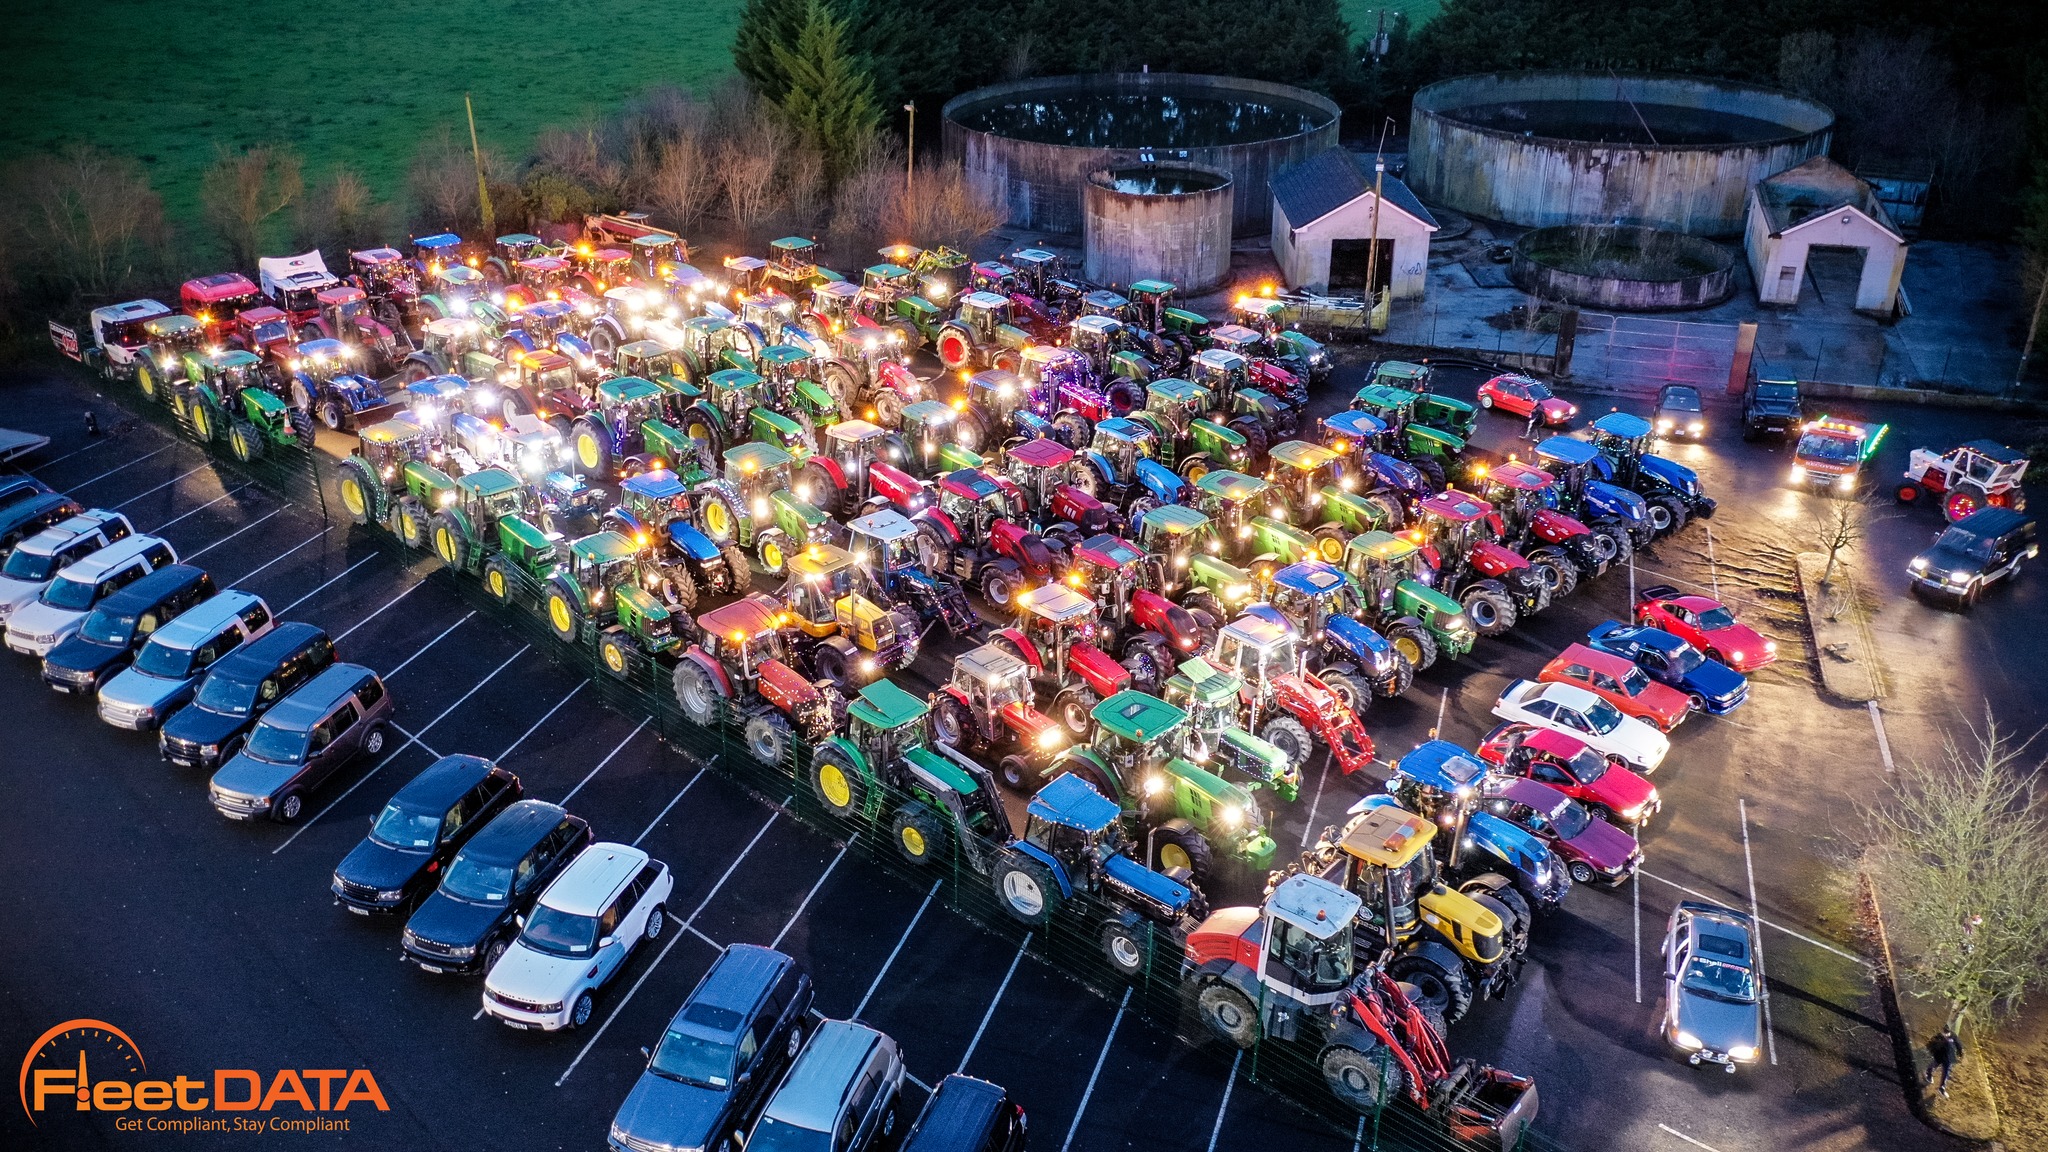 Light Up the Sky 2023 will feature a magnificent display of illuminated tractors, trailers, and vintage cars